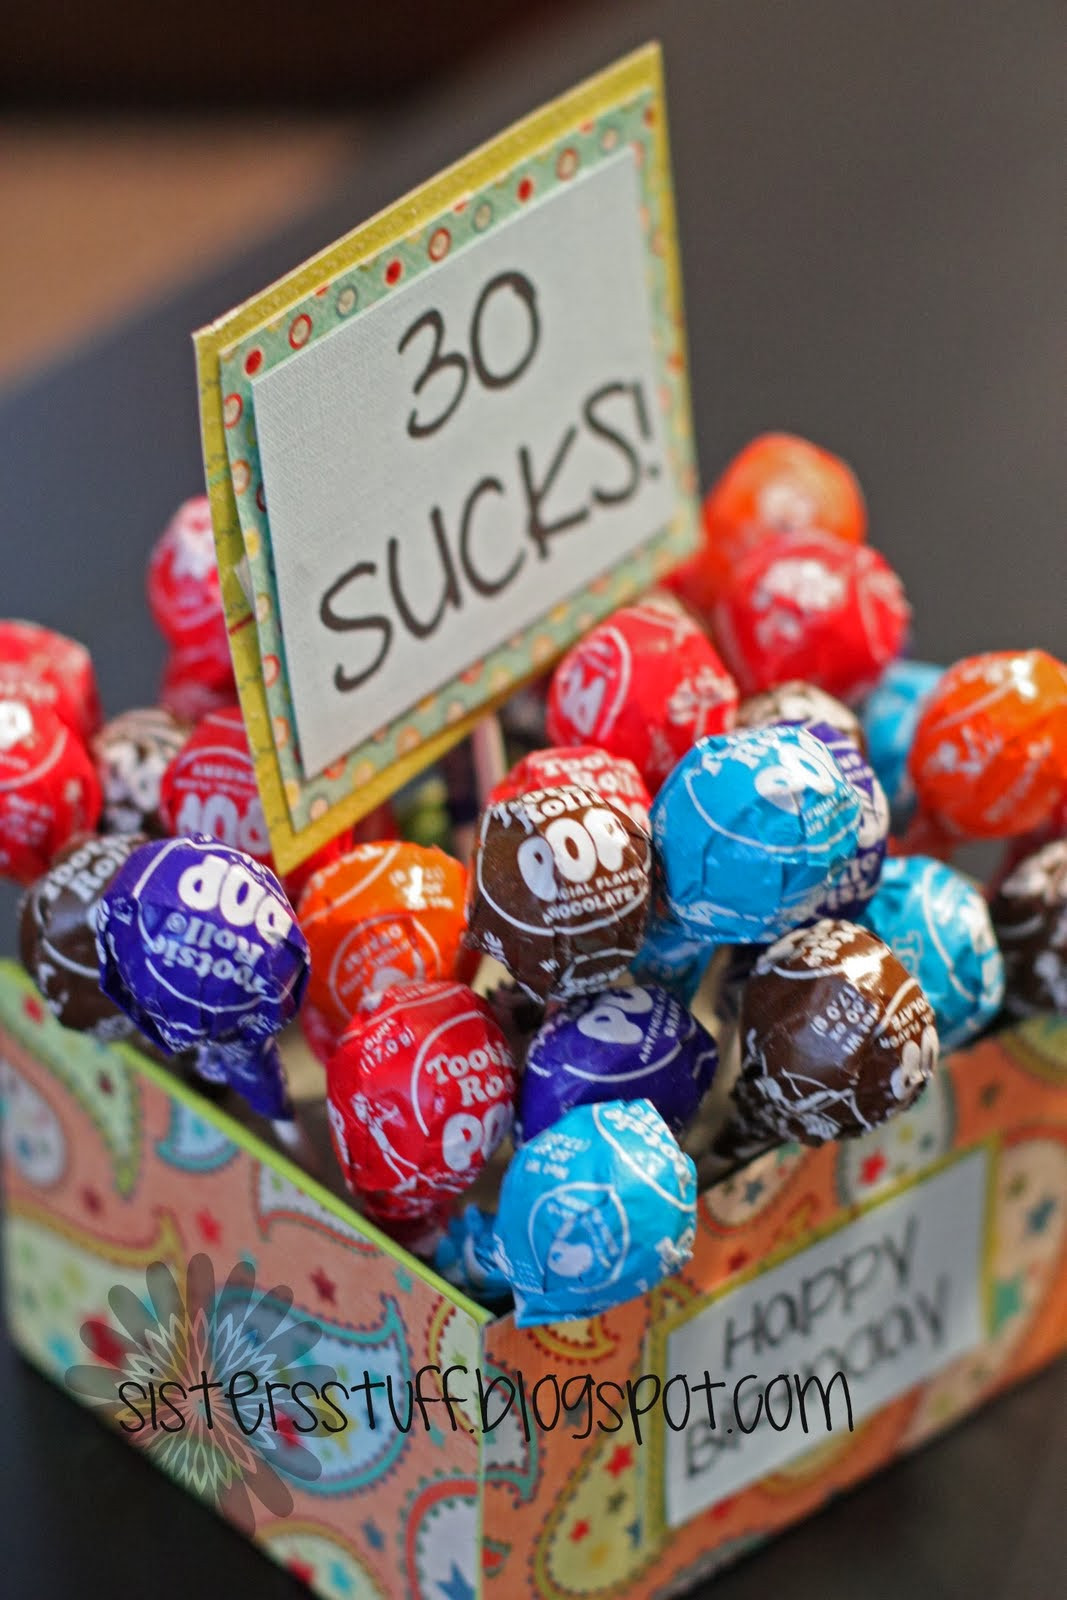 30th Birthday Gifts
 Celebrate In Style With These 50 DIY 30th Birthday Ideas